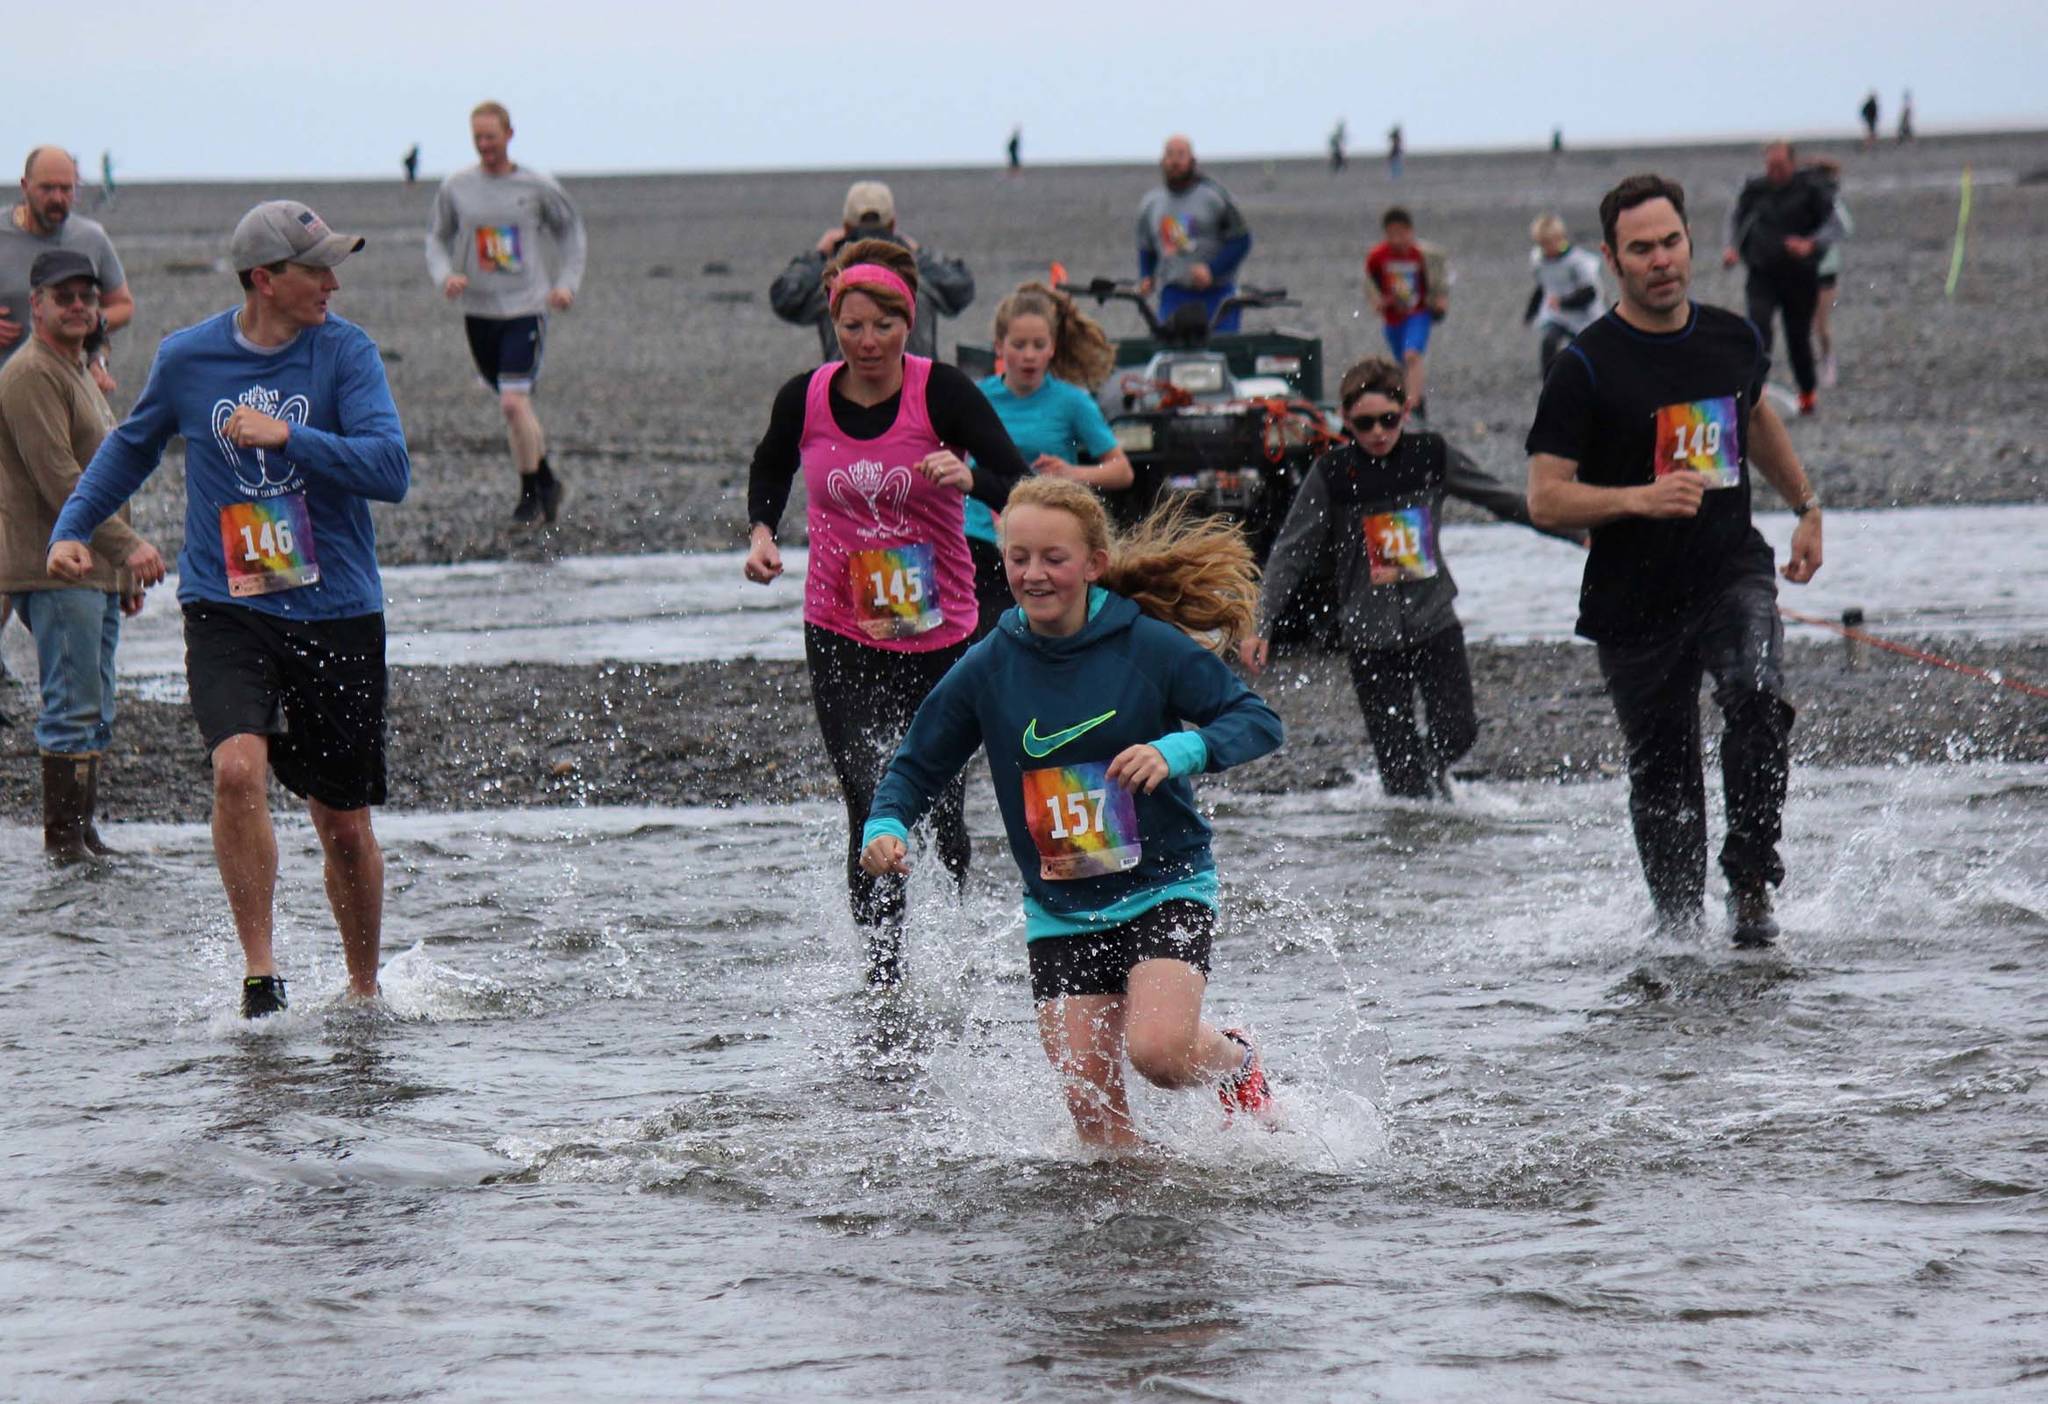 Undaunted by the rugged course, athletes young and old participate in Saturday’s 2019 Clam Scramble, a 5K fun run Saturday, June 15, 2019 in Ninilchik, Alaska. Kylee Verkulien, 157, leads this group of runners through the cold and fast-moving water at the mouth of Deep Creek. (Photo by McKibben Jackinsky)